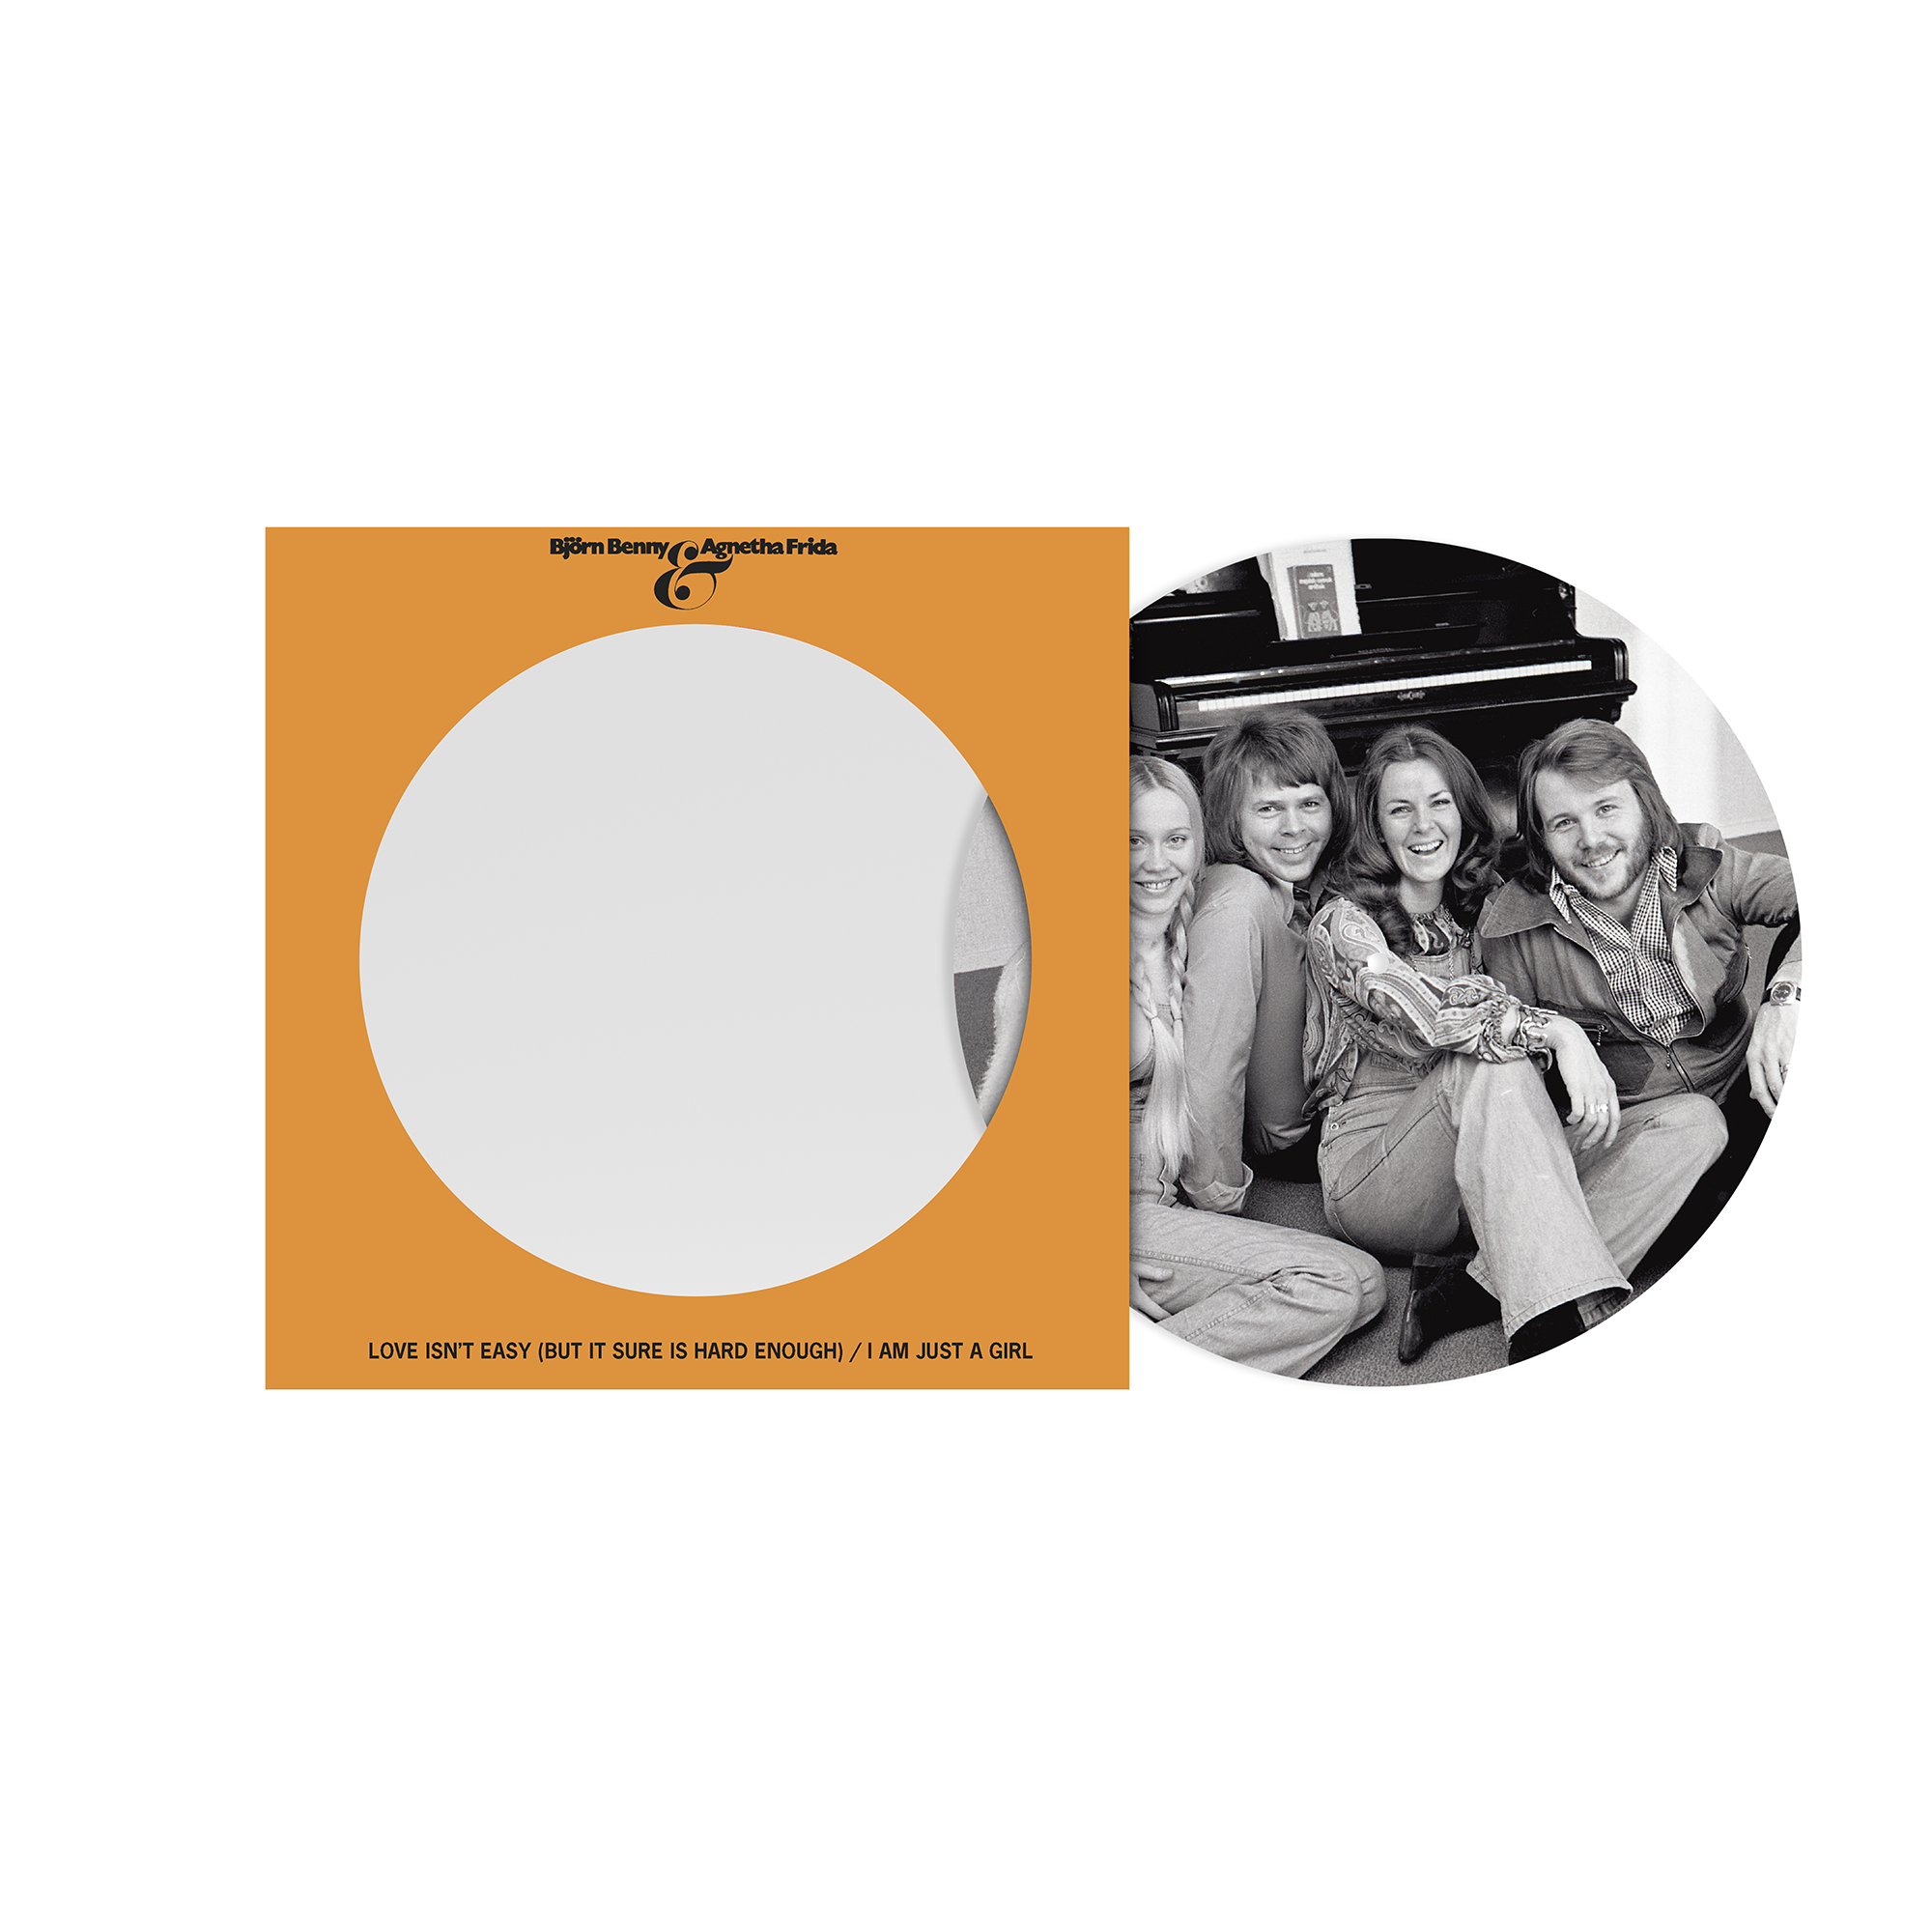 ABBA - Love Isn’t Easy (But It Sure Is Hard Enough) / I Am Just A Girl (Picture Disc 7")